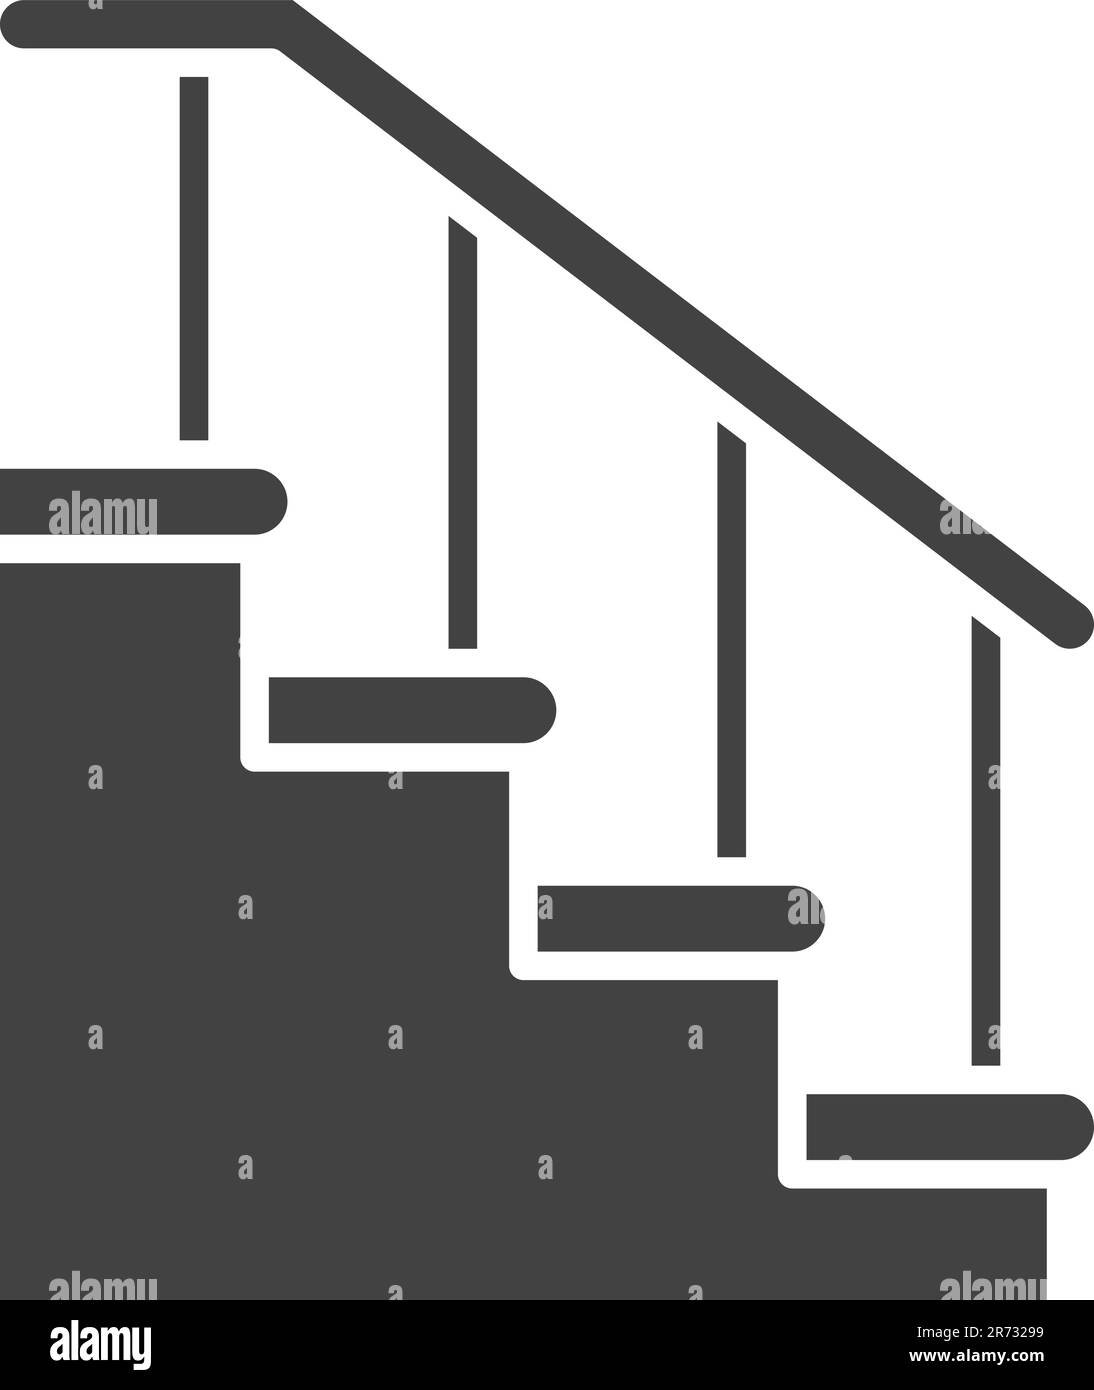 Stairs icon vector image. Stock Vector